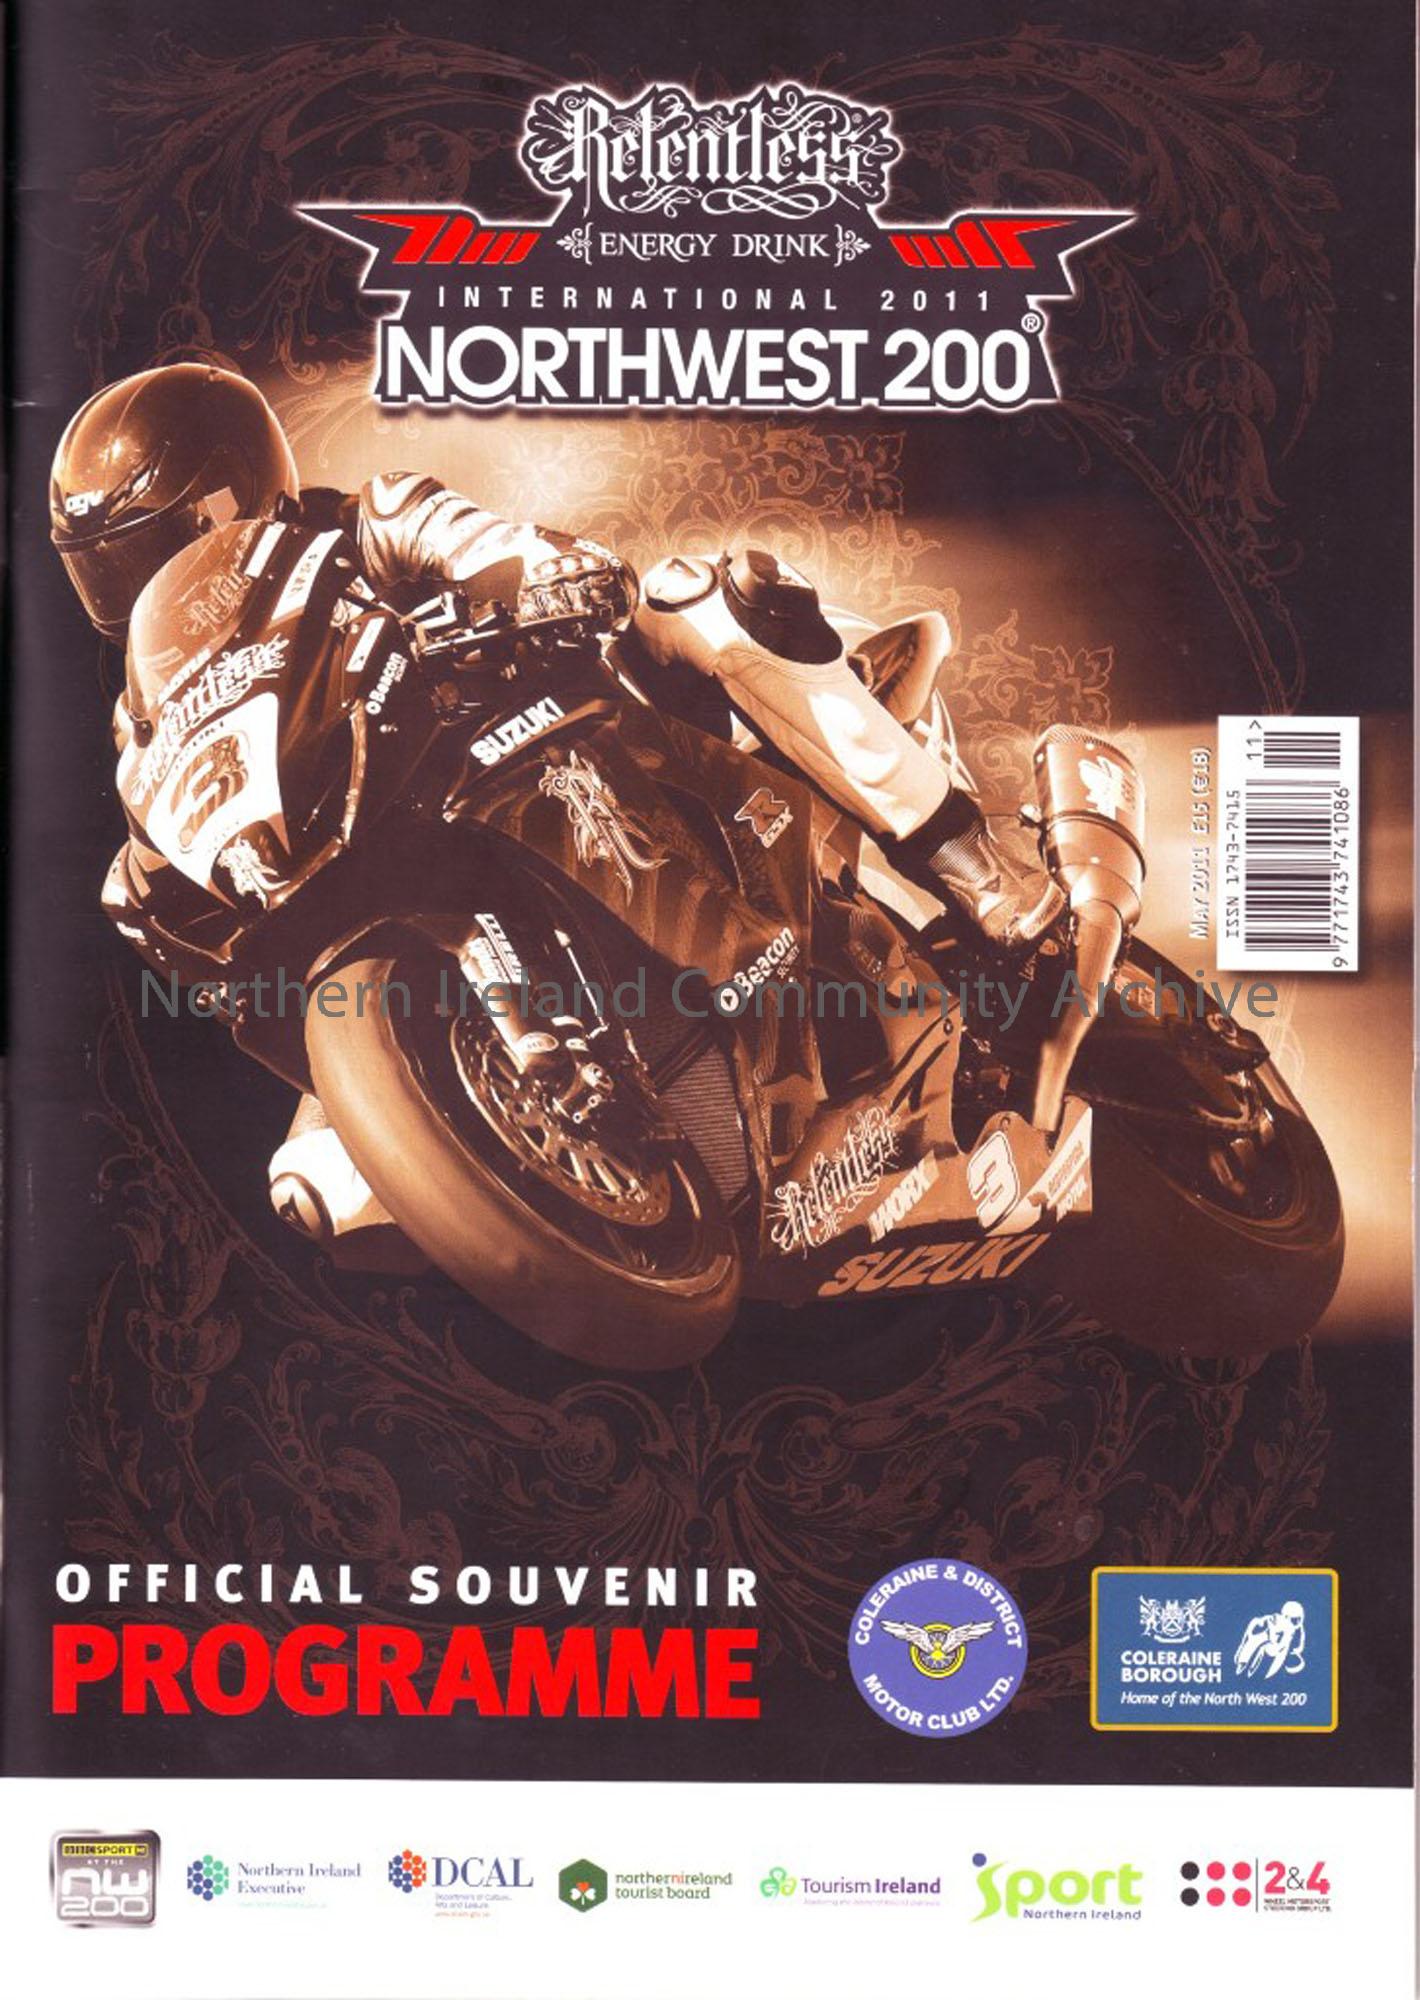 International 2011 North West 200 official Souvenir programme – sponsored by Relentless energy drink